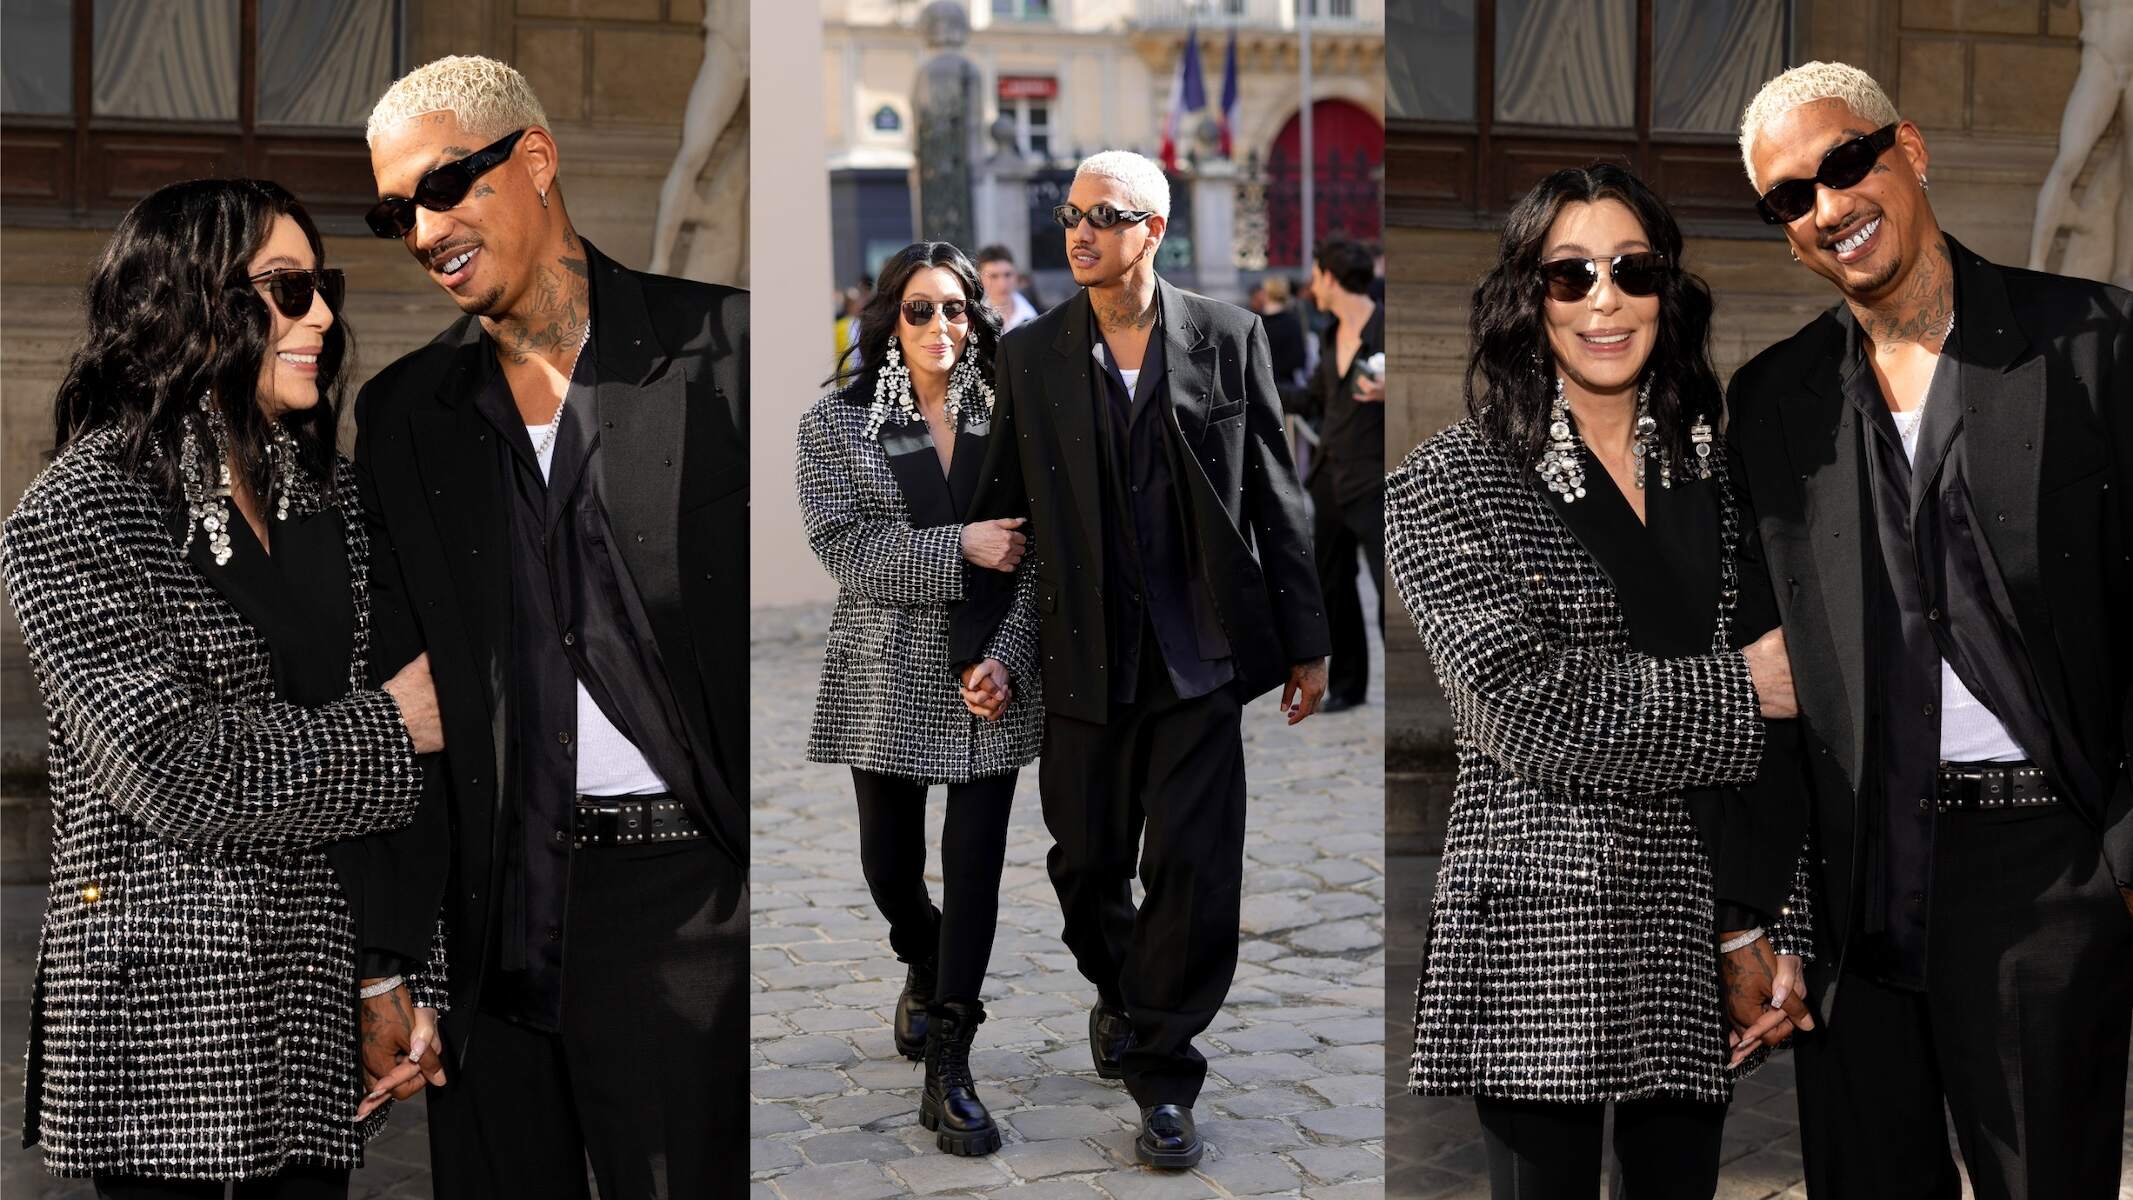 Couple Cher and Alexander Edwards attending the Valentino runway show in Milan wearing blazers